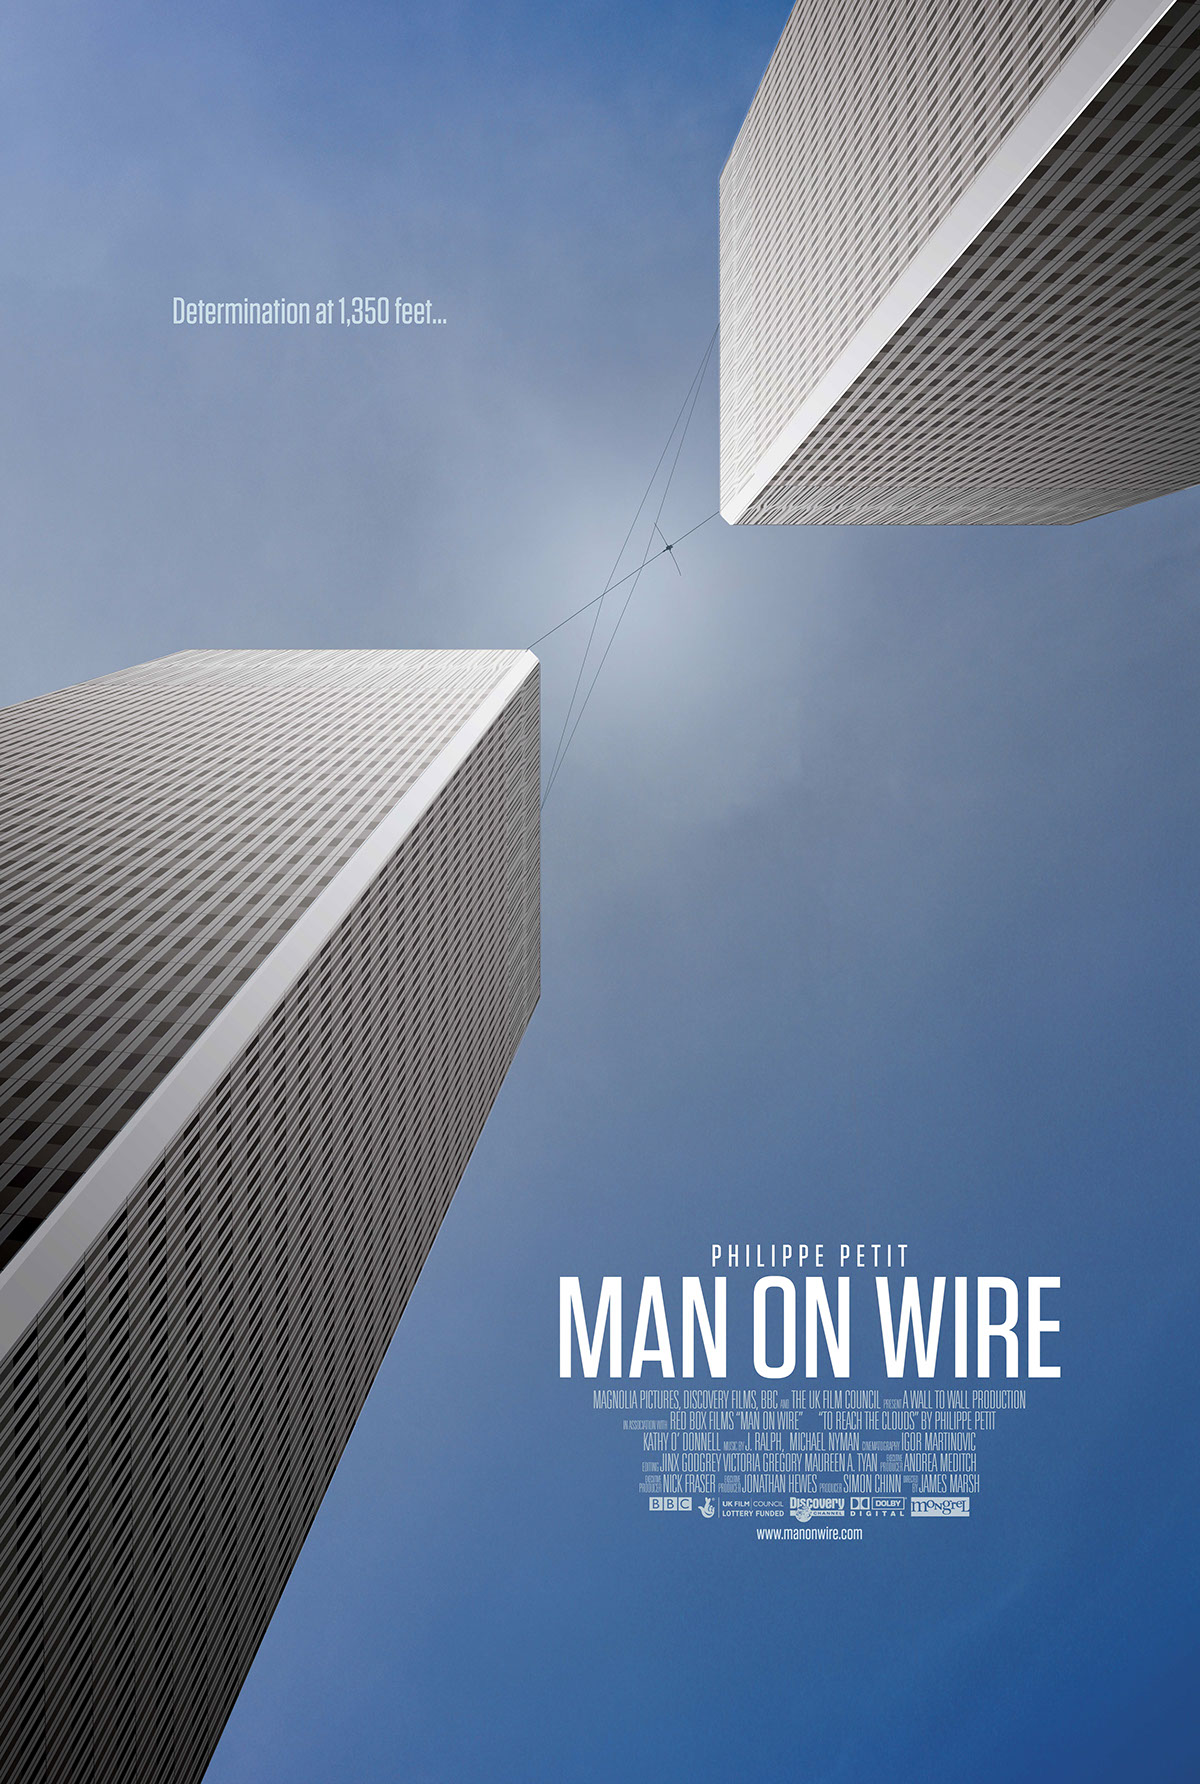 Image gallery for Man on Wire - FilmAffinity